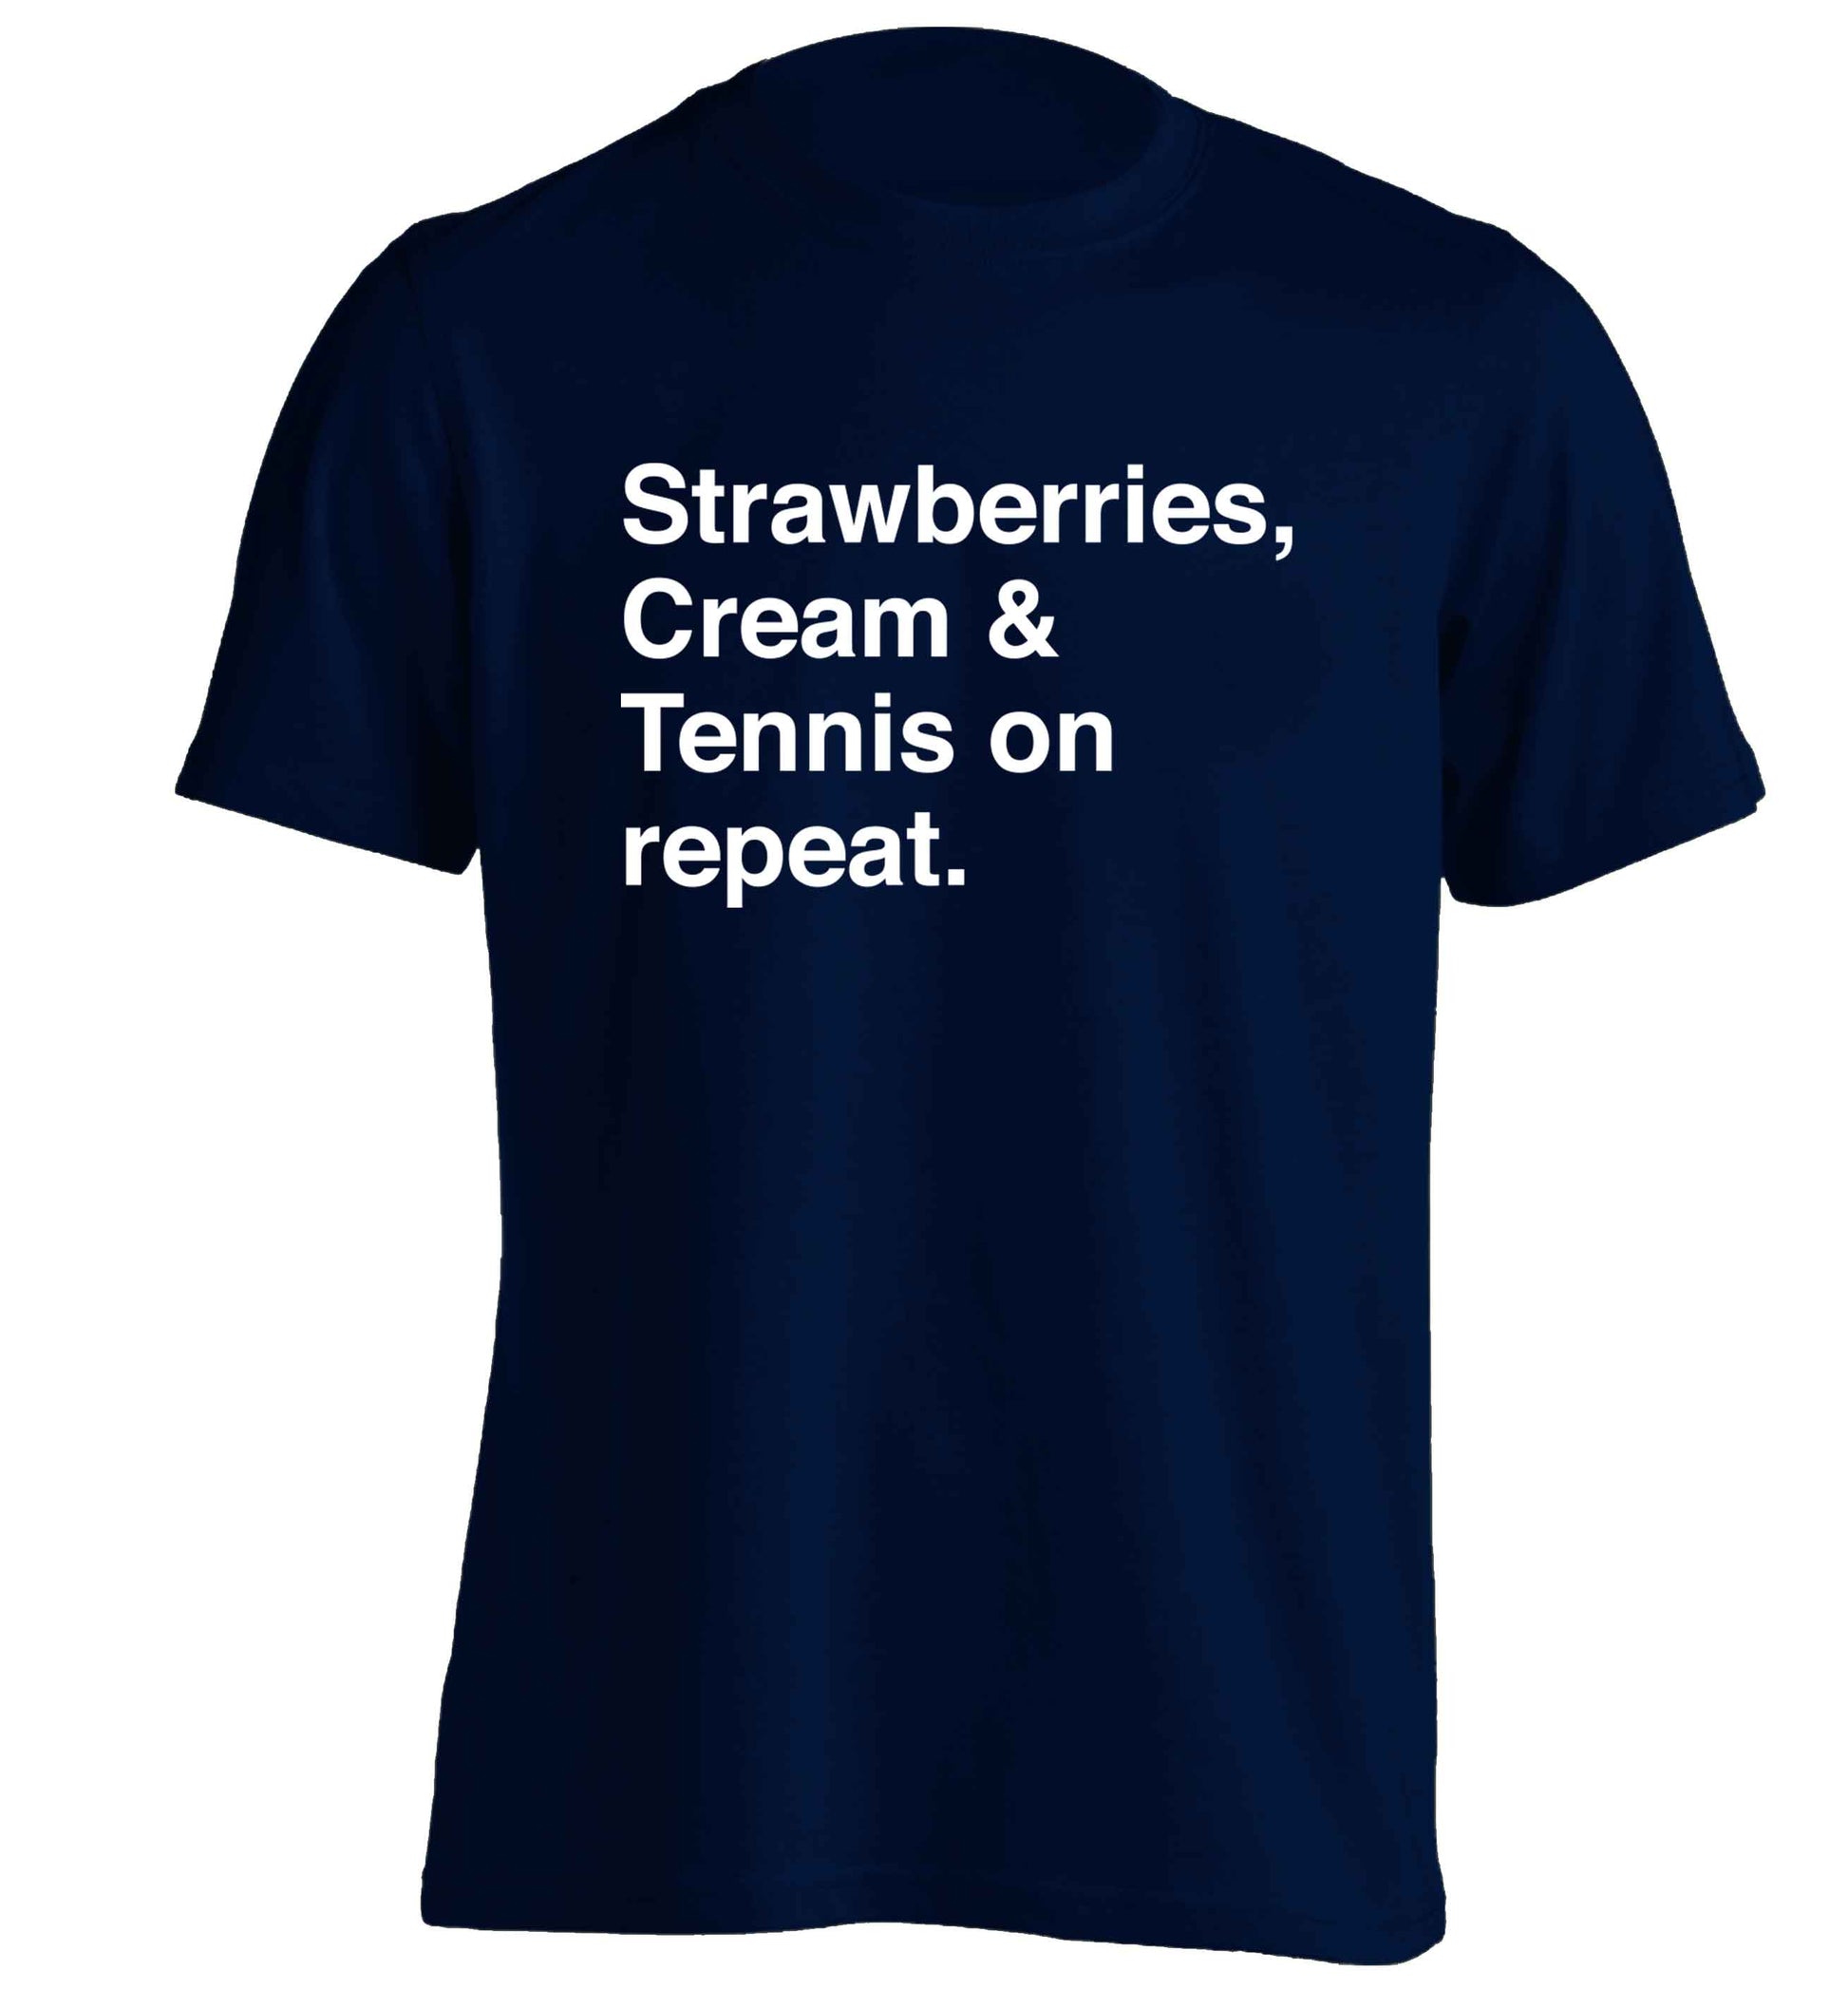 Strawberries, cream and tennis on repeat adults unisex navy Tshirt 2XL